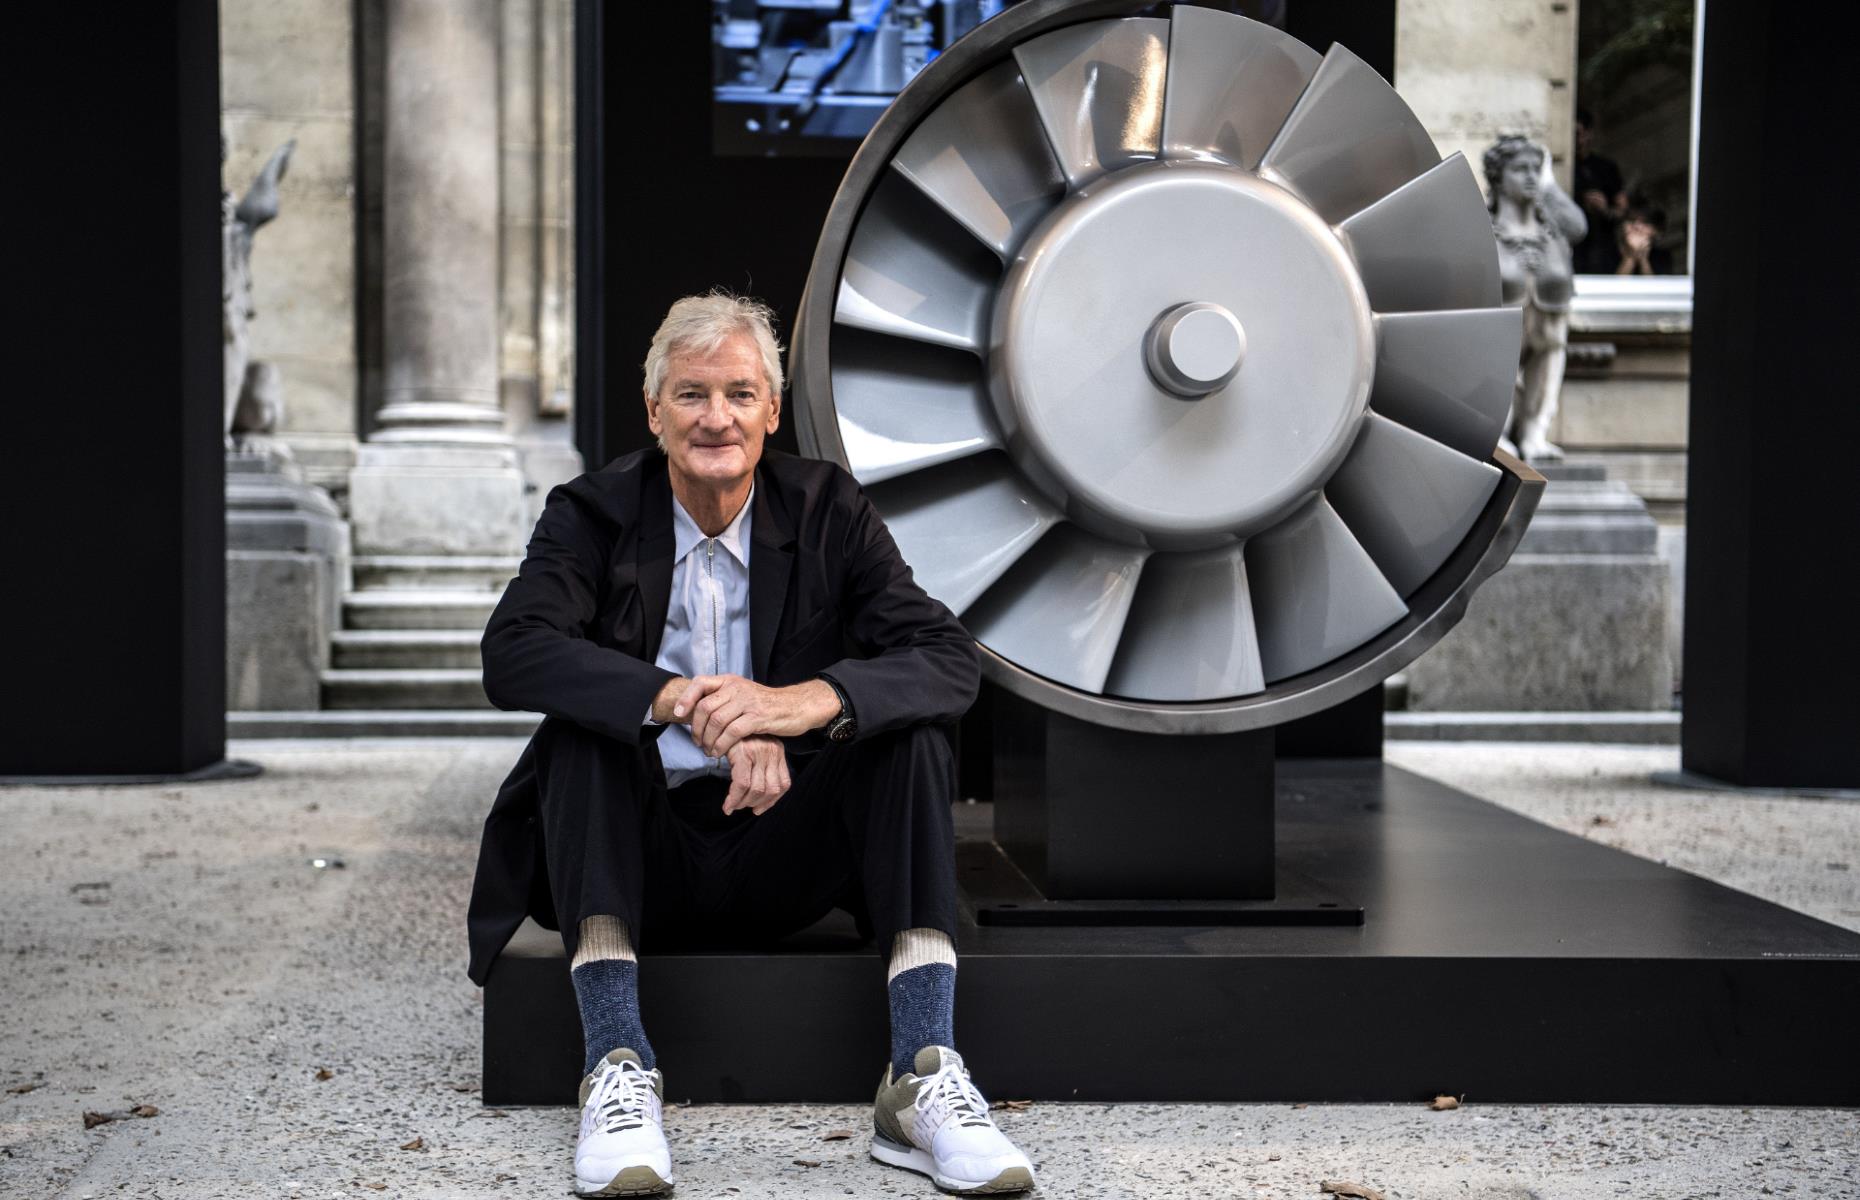 Sir James Dyson's rocky ride to the top